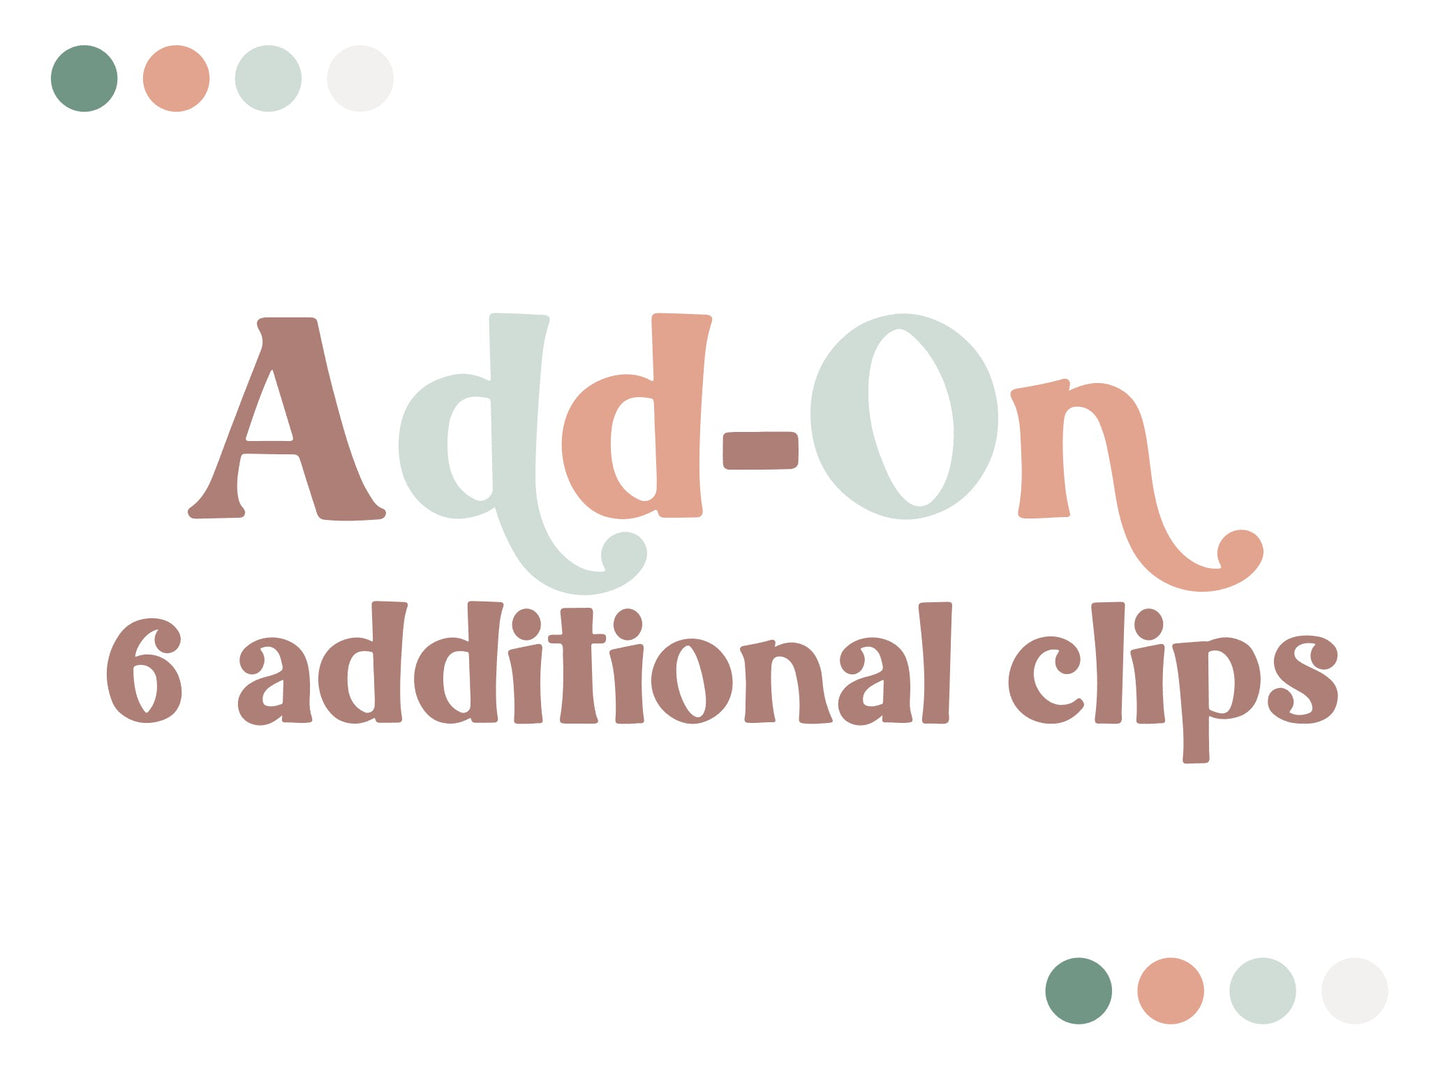 6 Additional Clips - Add-on